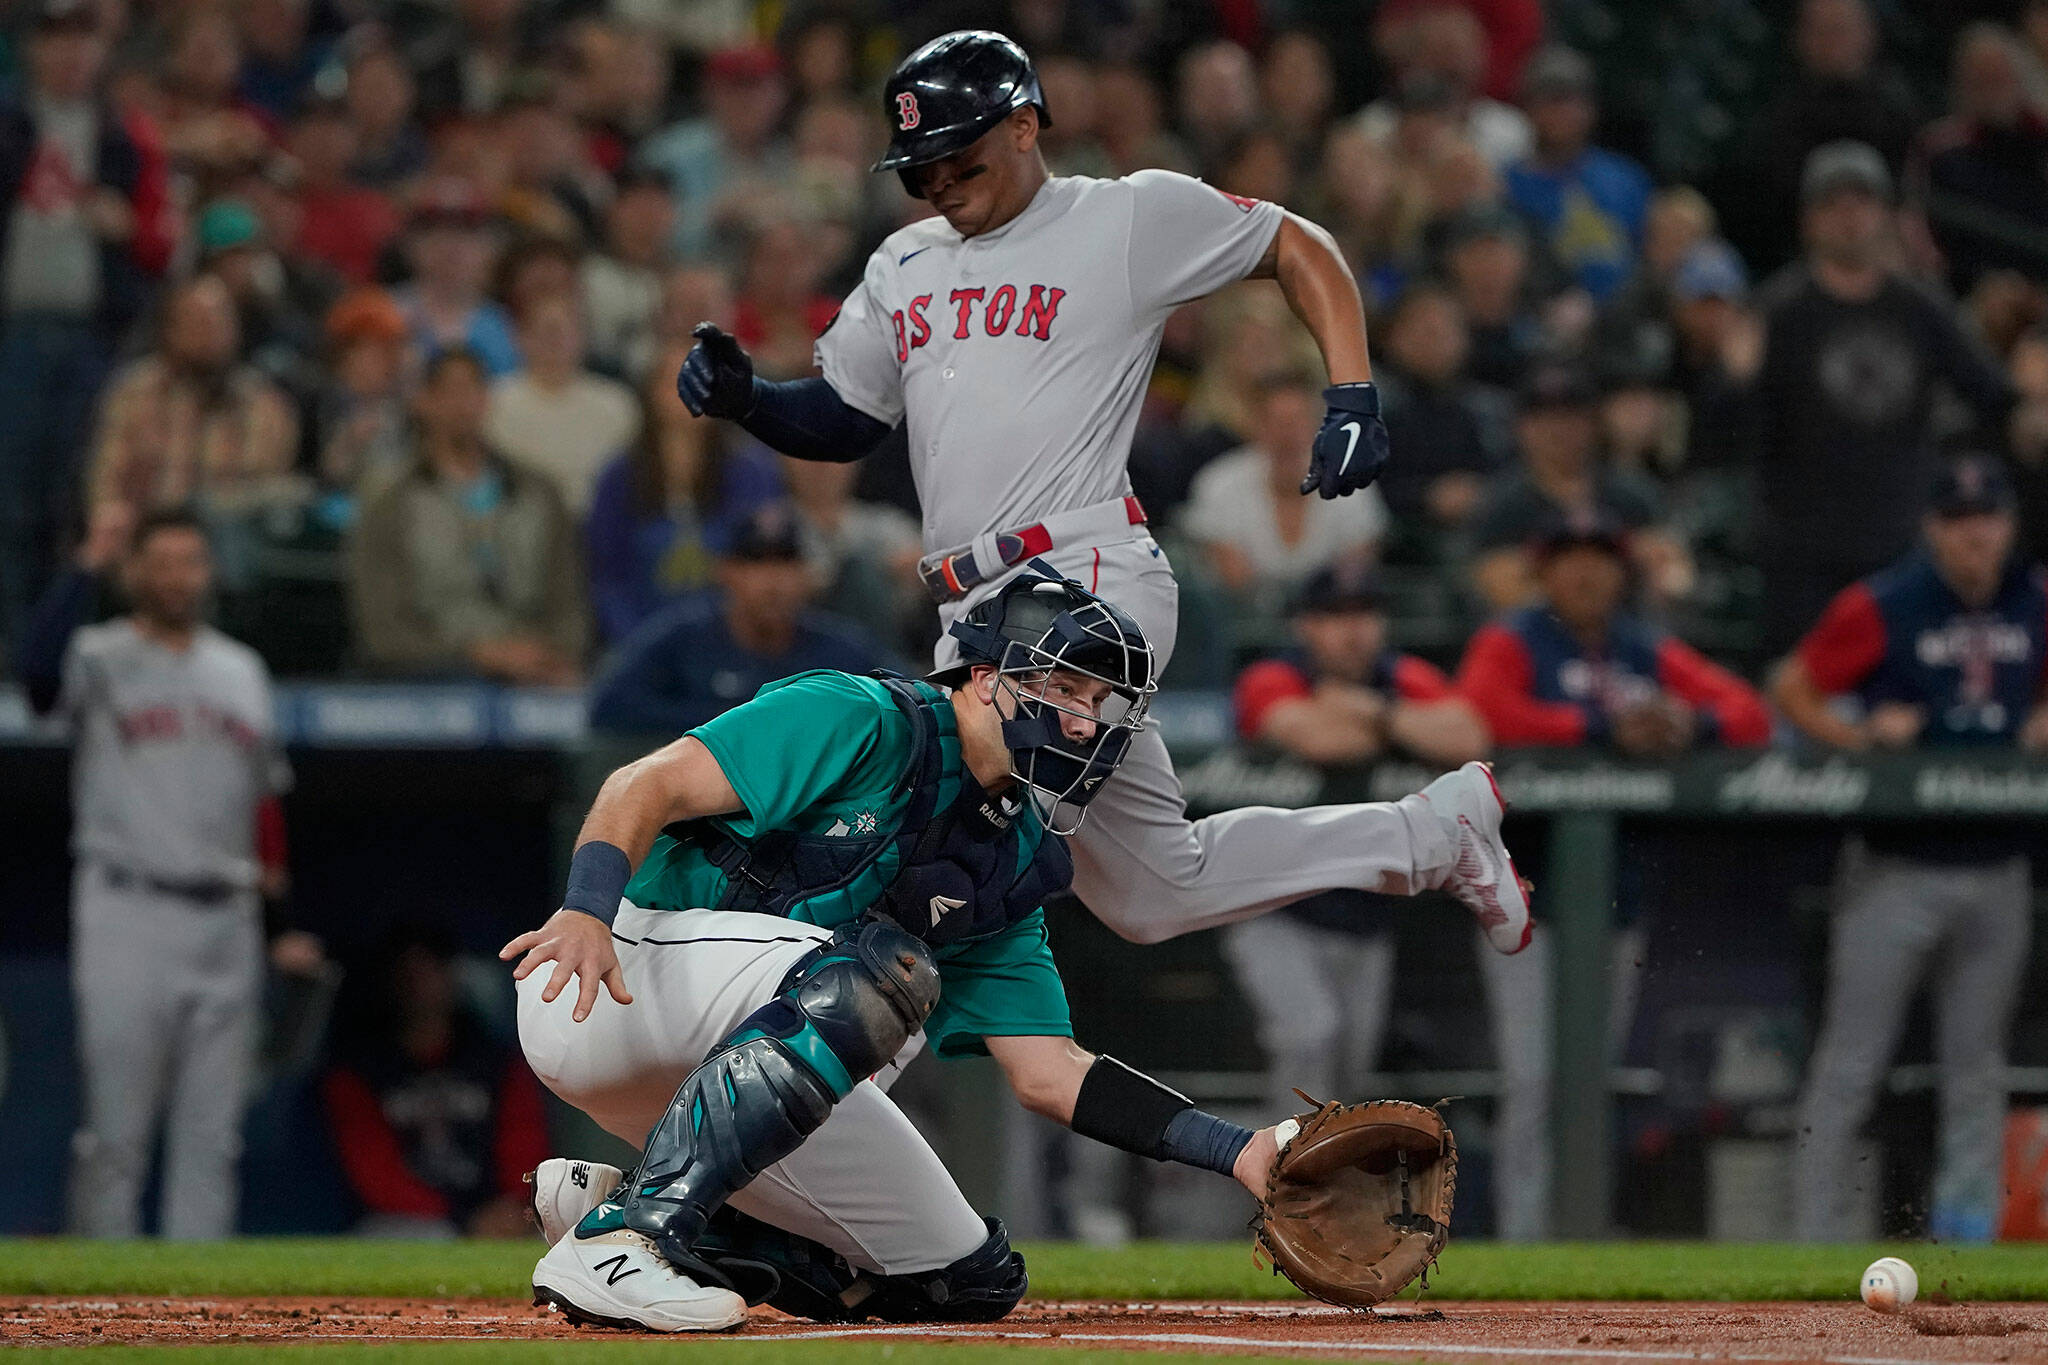 Martinez, Dalbec homers give Sox 4-3 win over Mariners